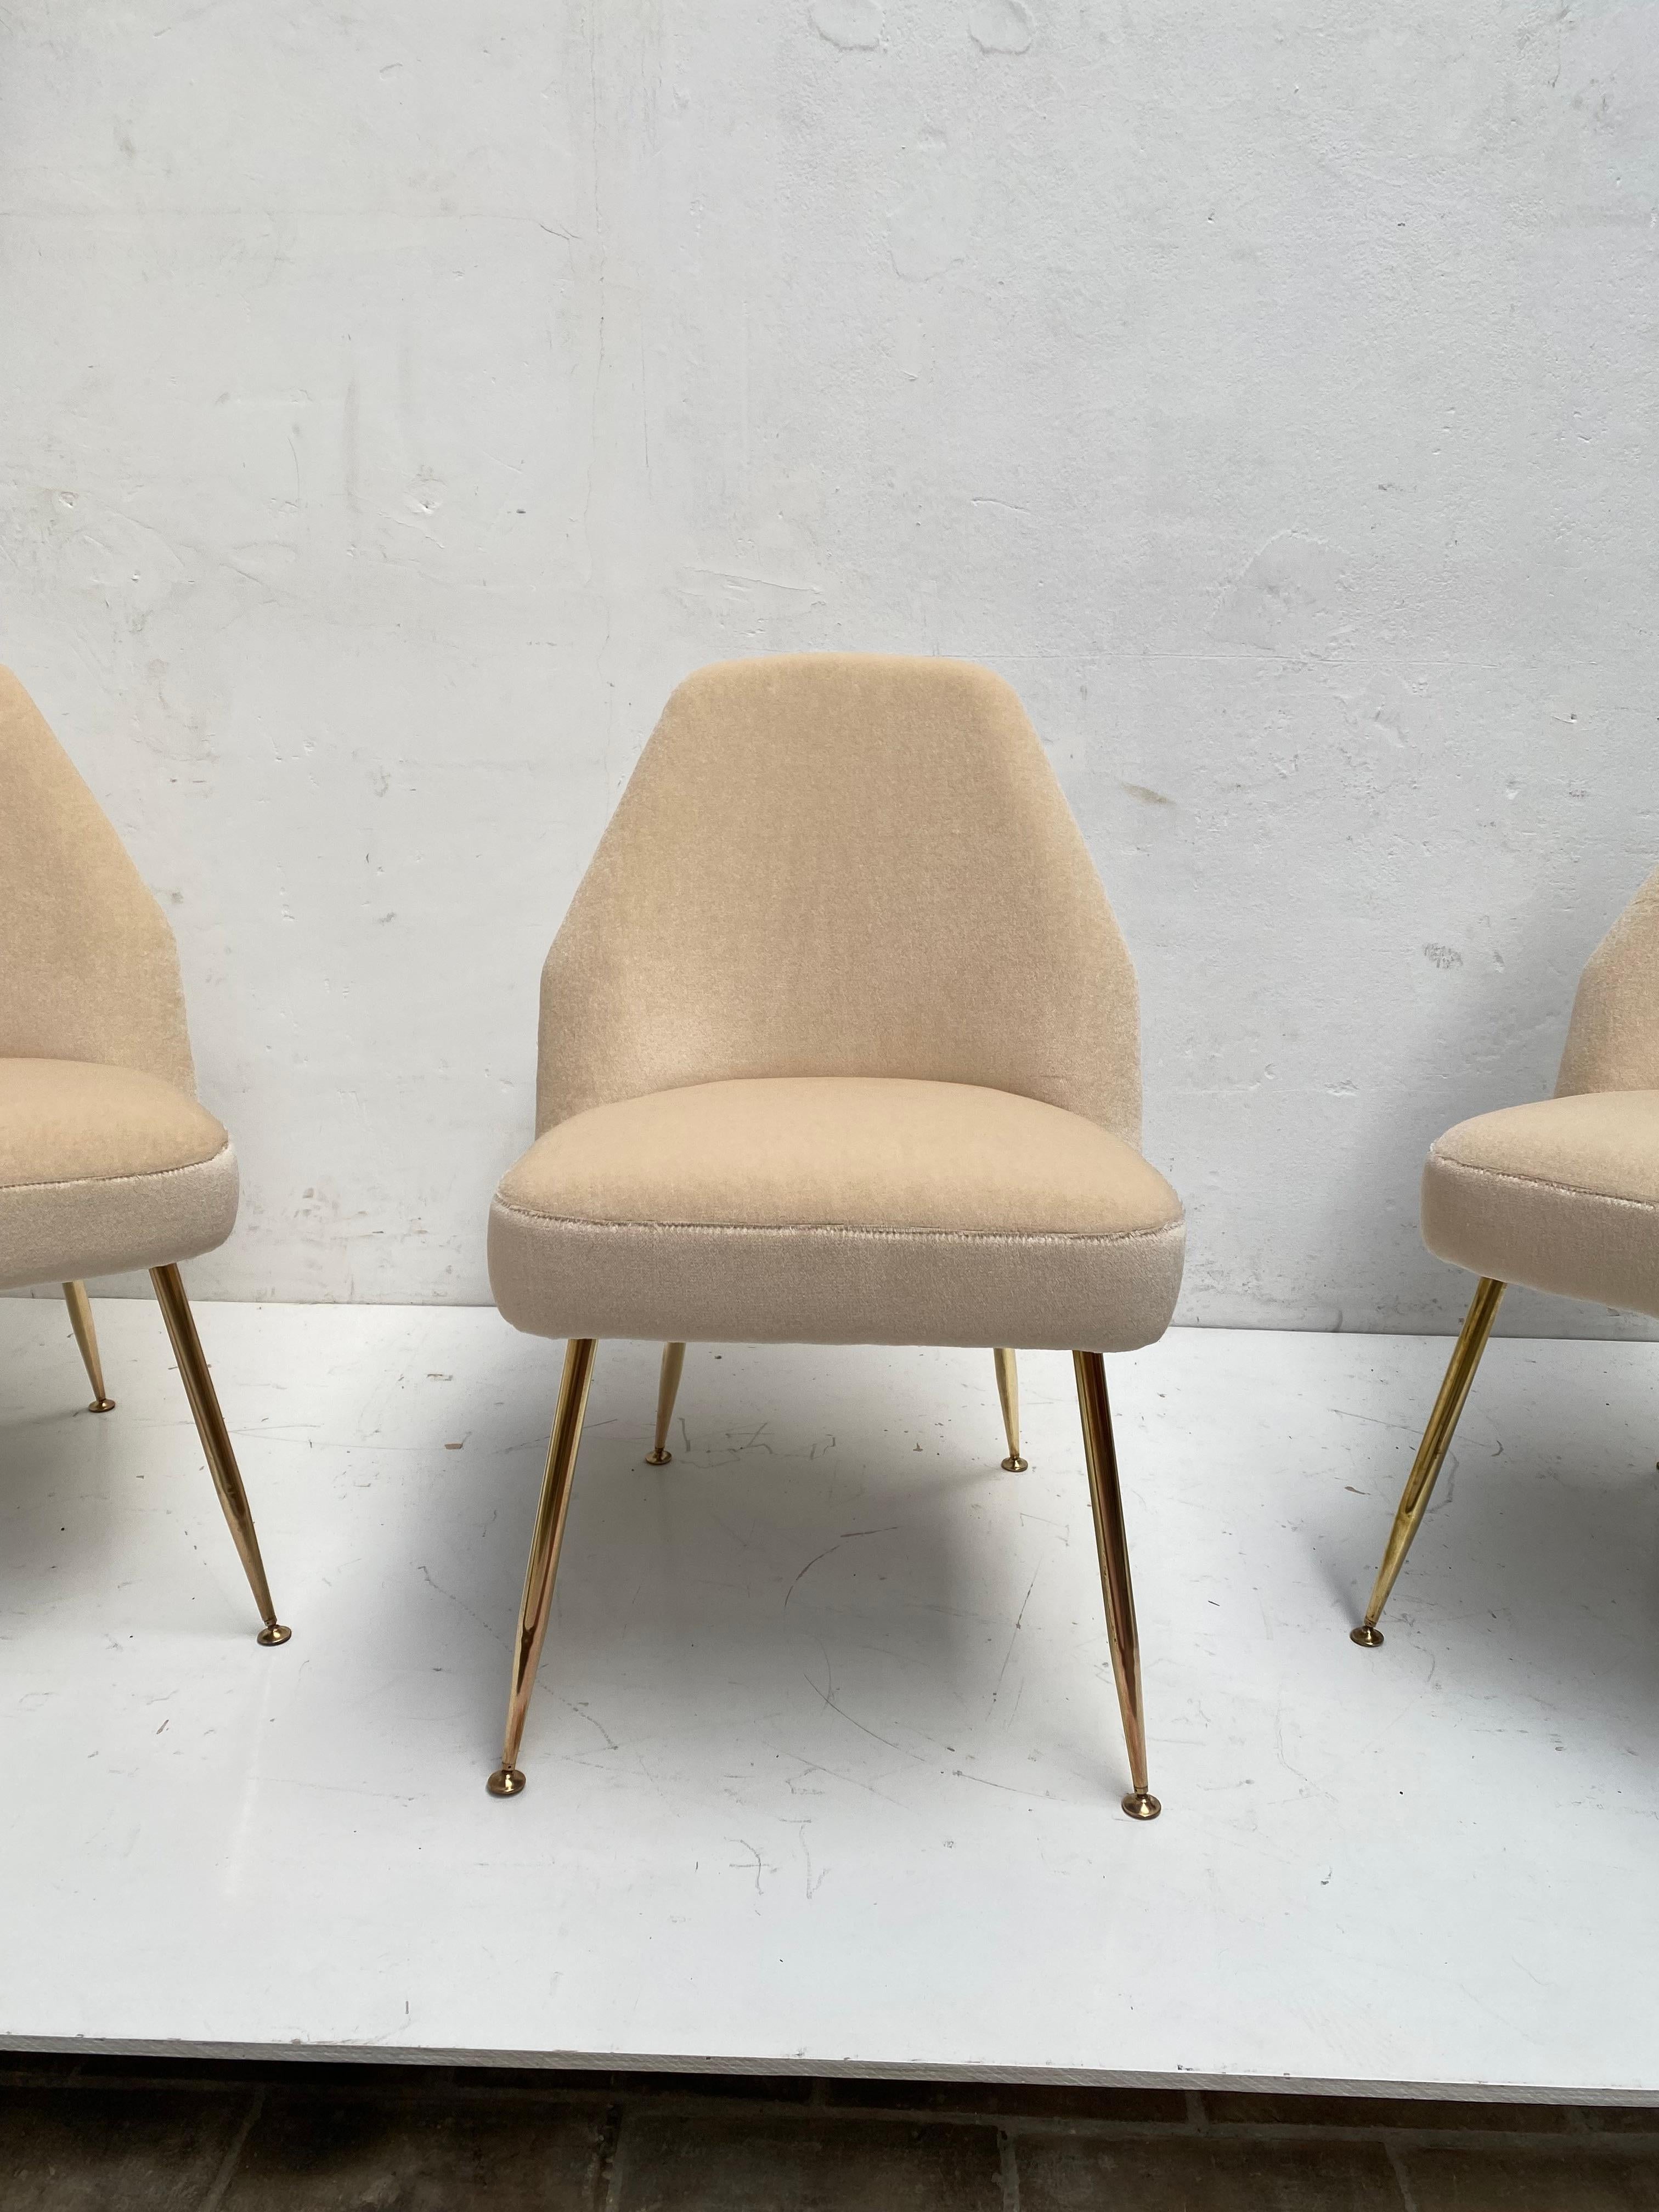 Enameled 12 Brass & Mohair Campanula Chairs by Pagani (Partner of Gio Ponti) Arflex 1952  For Sale